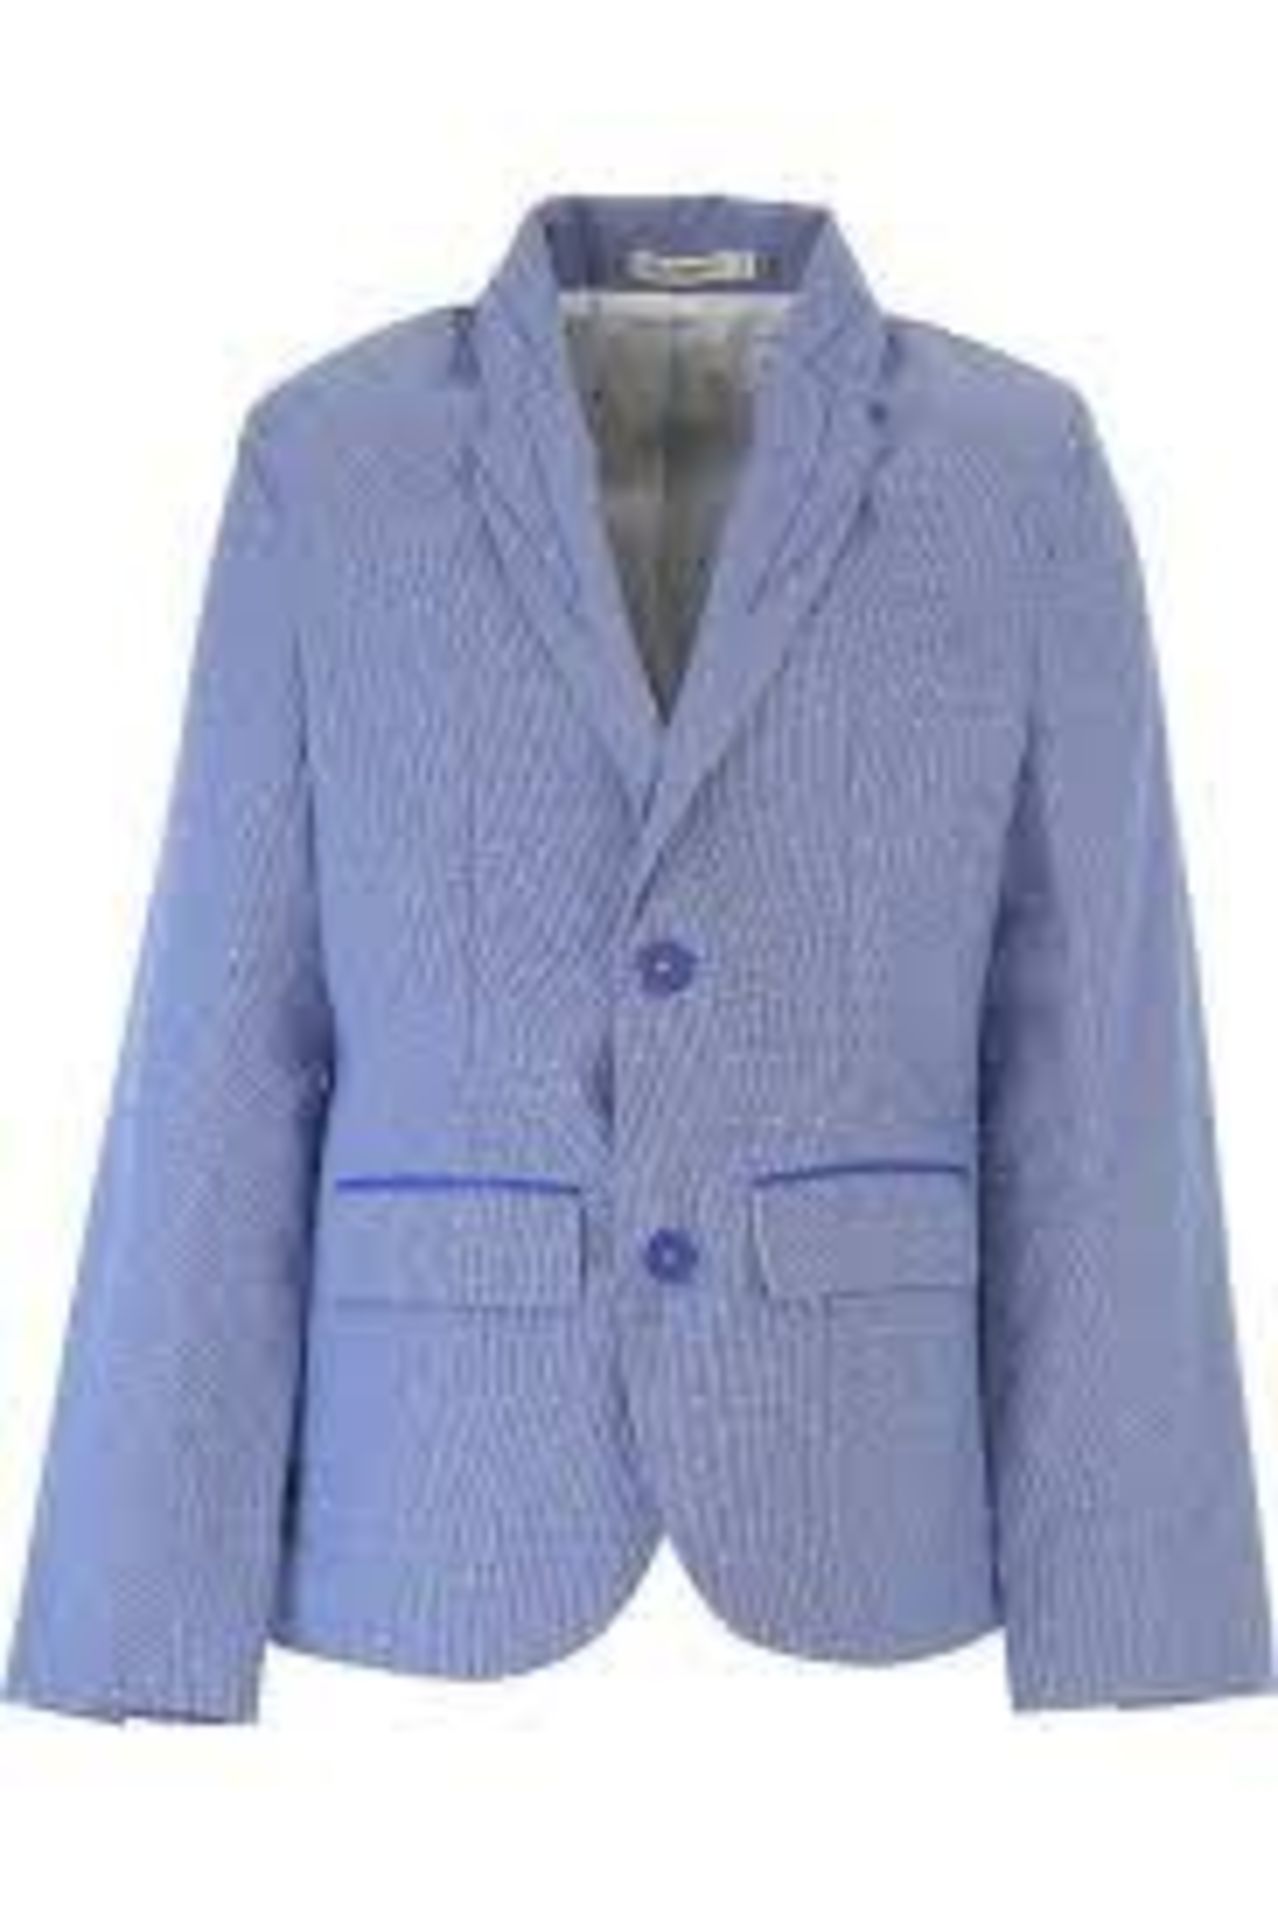 1 x BILLYBANDIT Blazer Blue - New With Tags - Size: 4A - Ref: V26114 - CL580 - NO VAT ON THE HAMMER